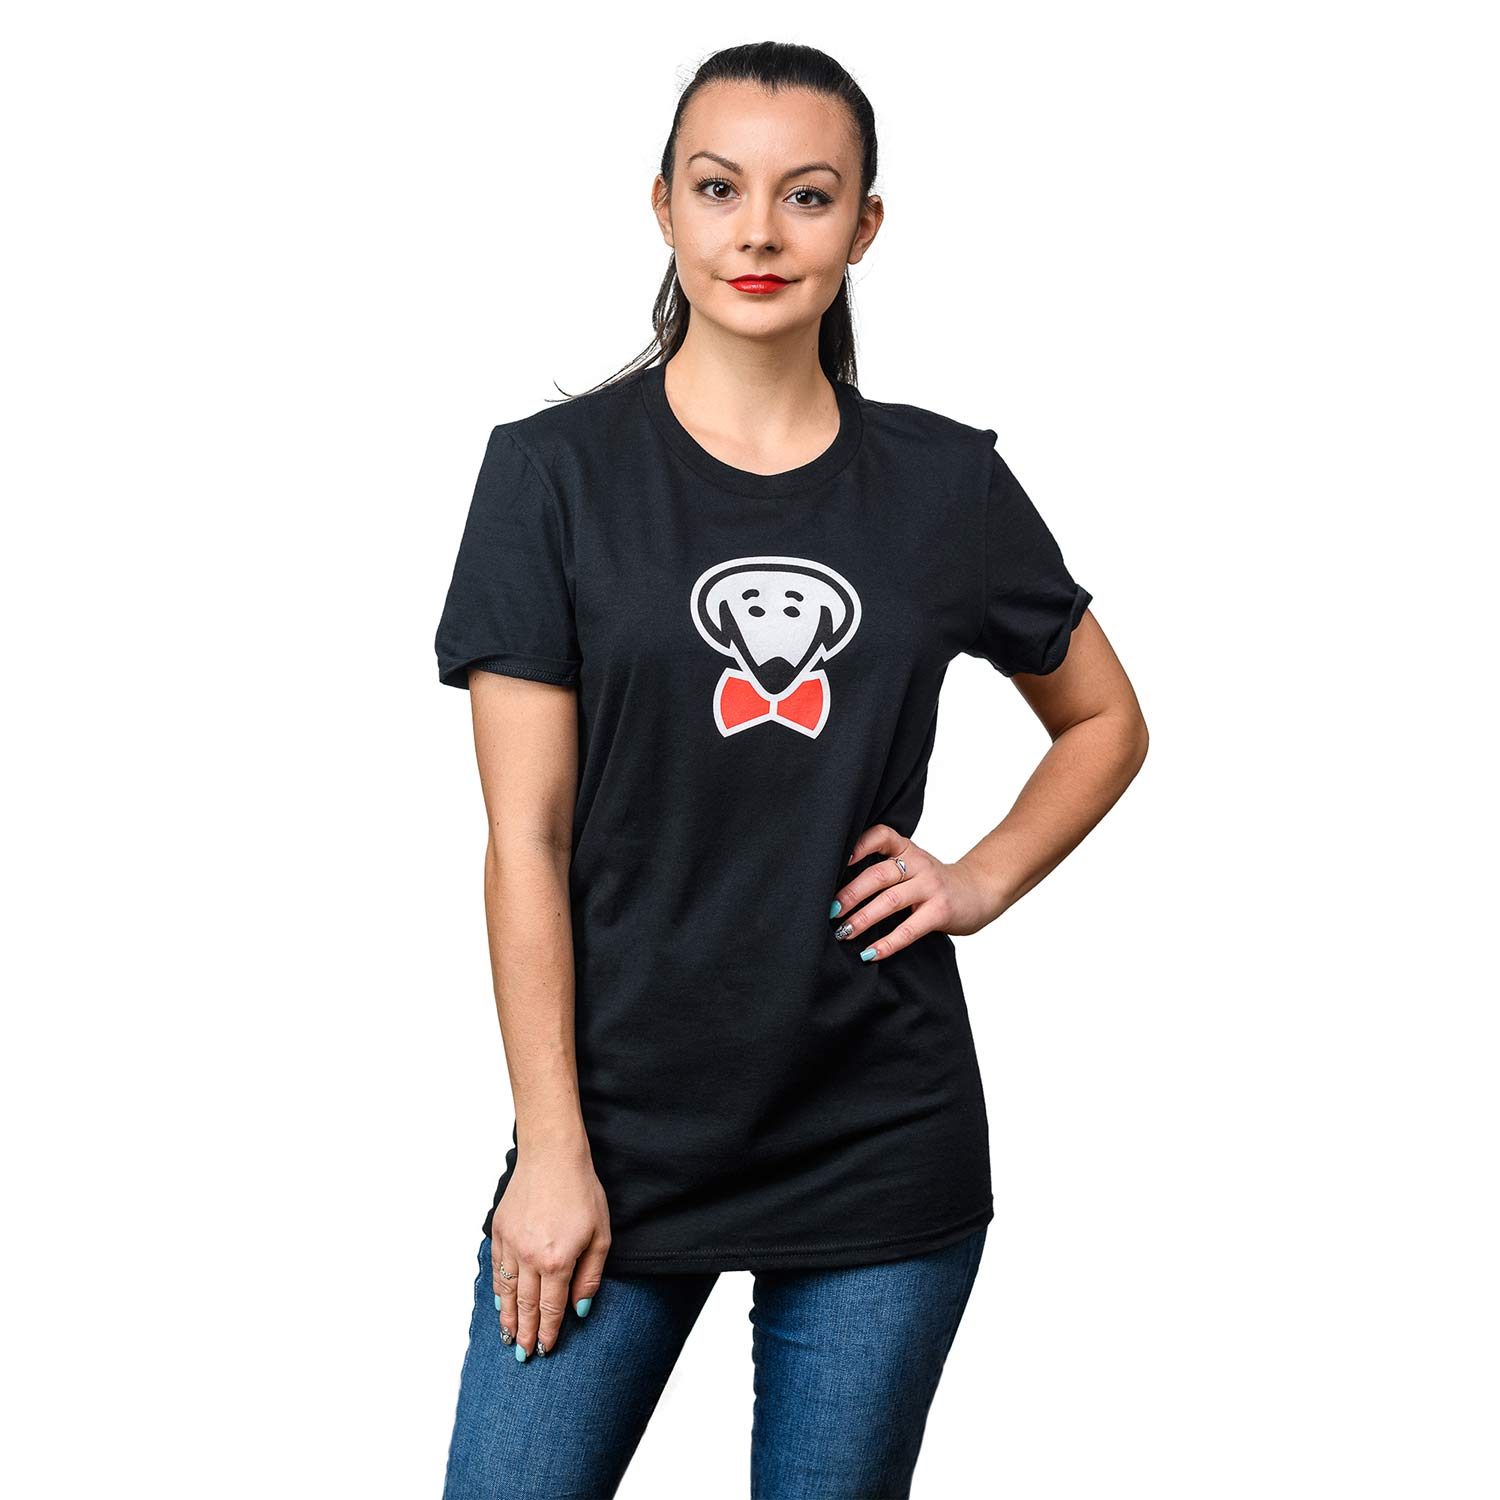 A classic and fun look! - Jesse T-shirt in black by Beau Tyler